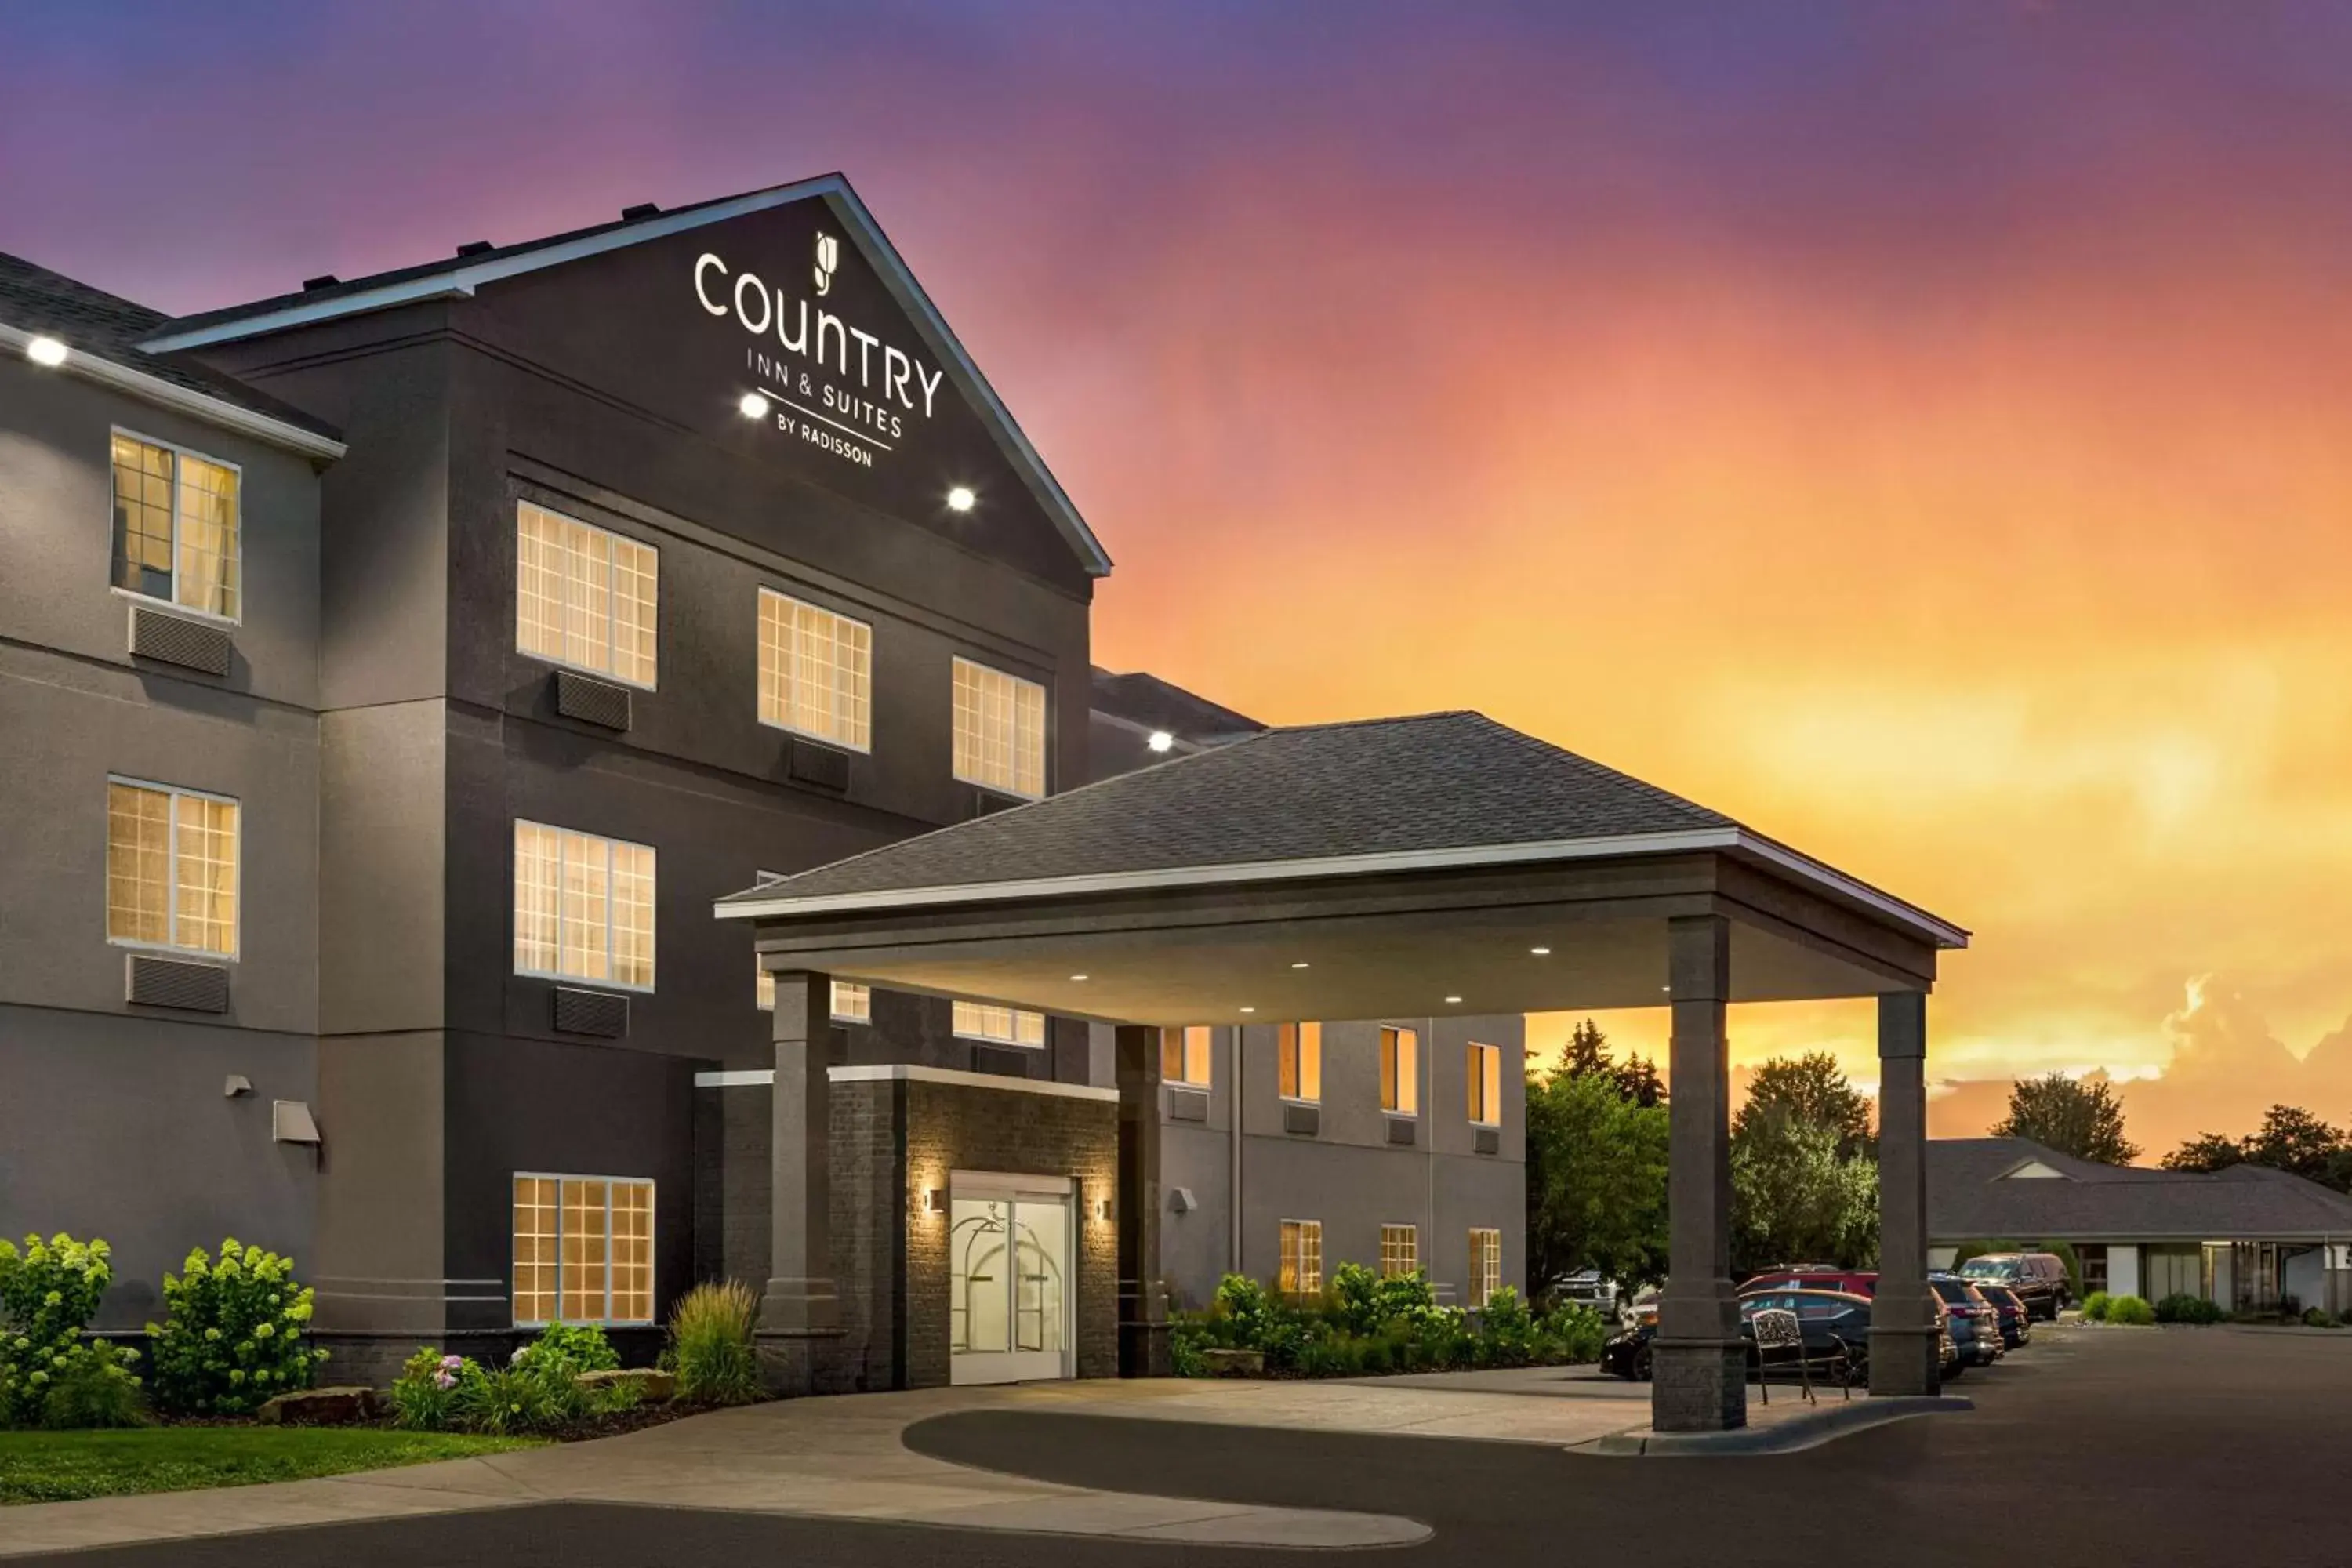 Property Building in Country Inn & Suites by Radisson, Stillwater, MN